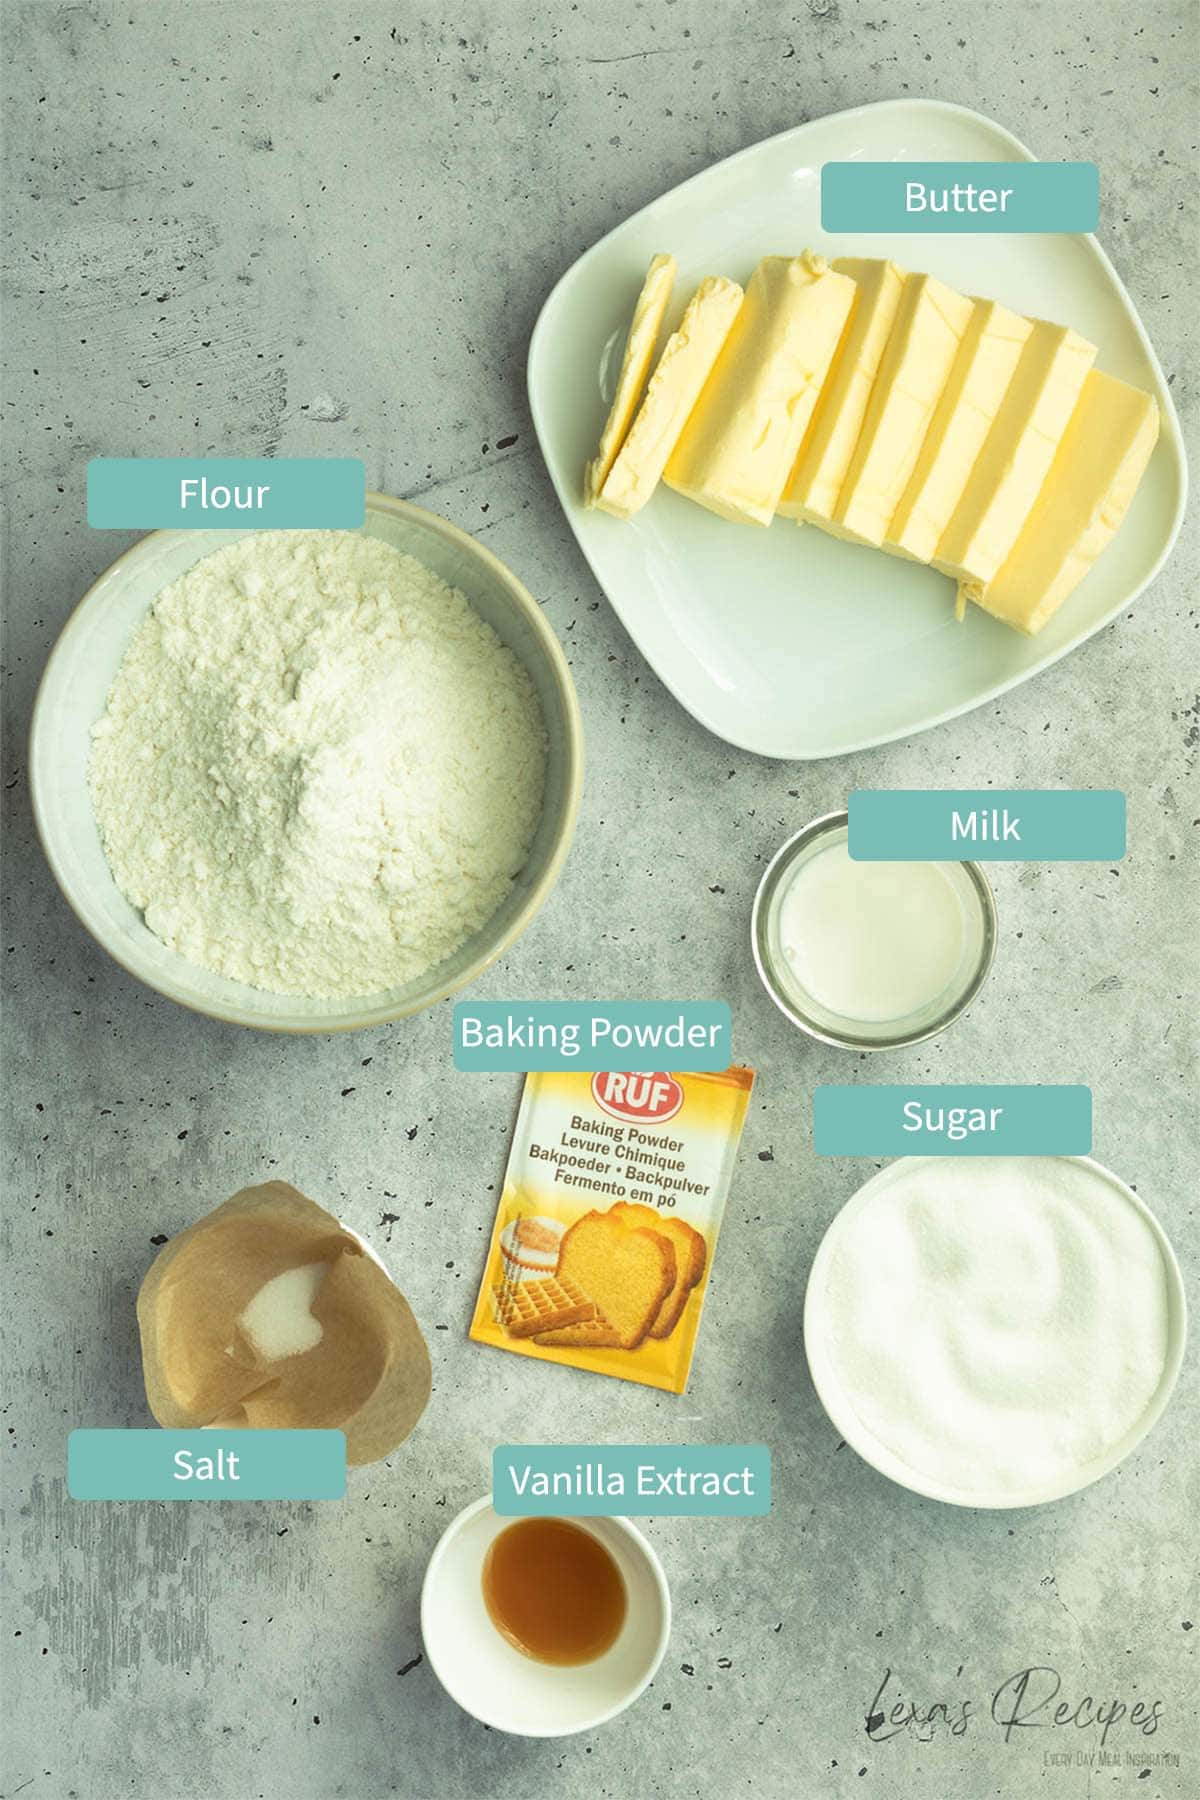 Picture showing all ingredients as listed below for shortbread cookies